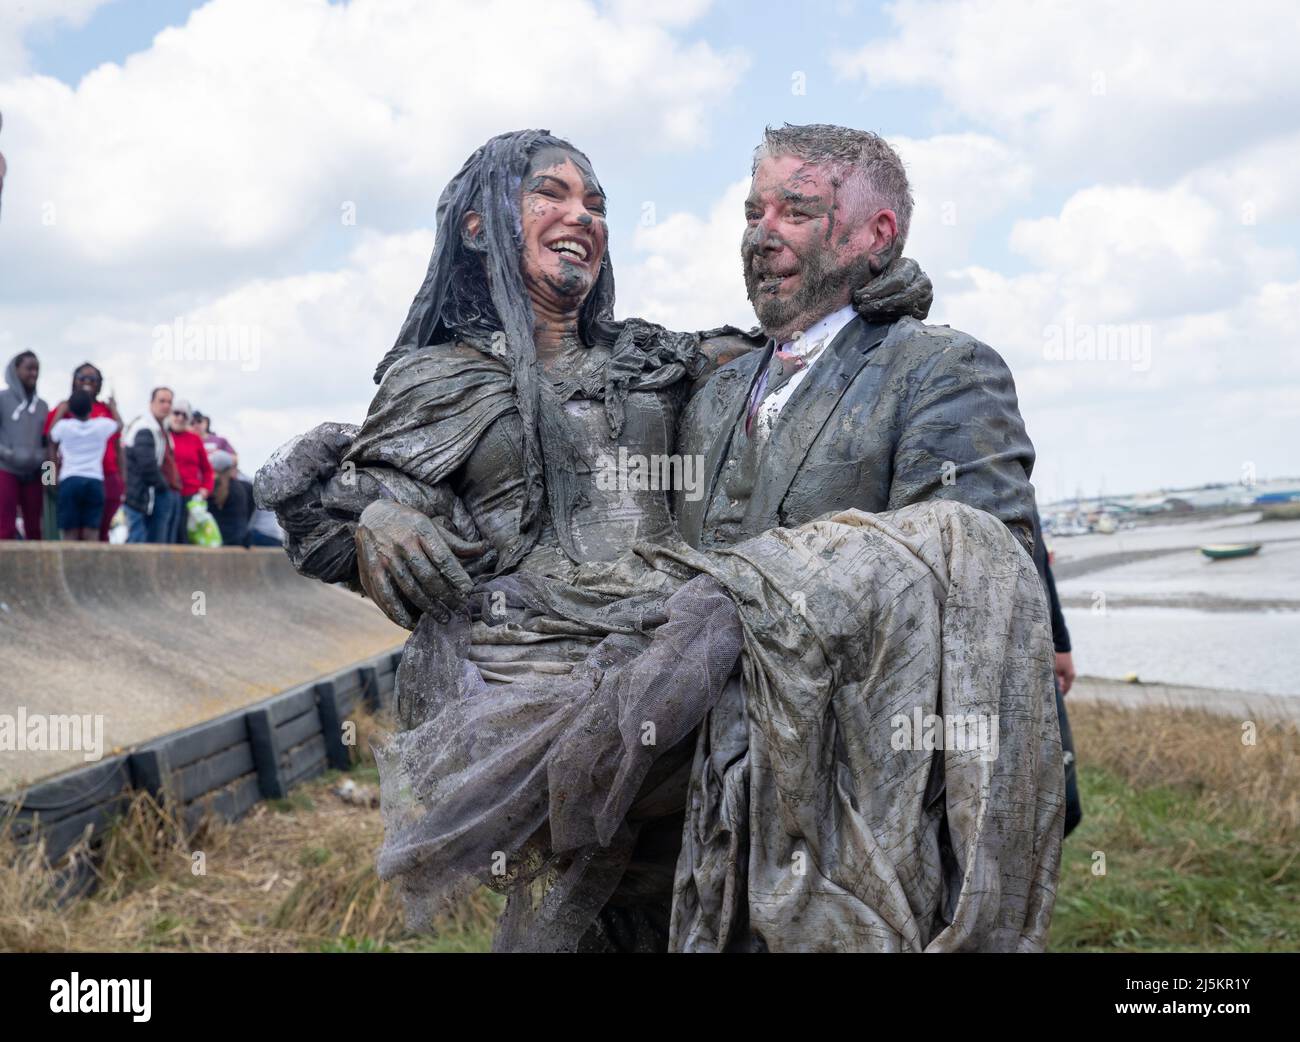 Maldon, Essex, UK. 24th April 2022. Competitors take part in the Maldon Mud Race in Maldon, Essex on April 24th 2022 as the race returns for the first time in two years. Credit: Lucy North/Alamy Live News Stock Photo